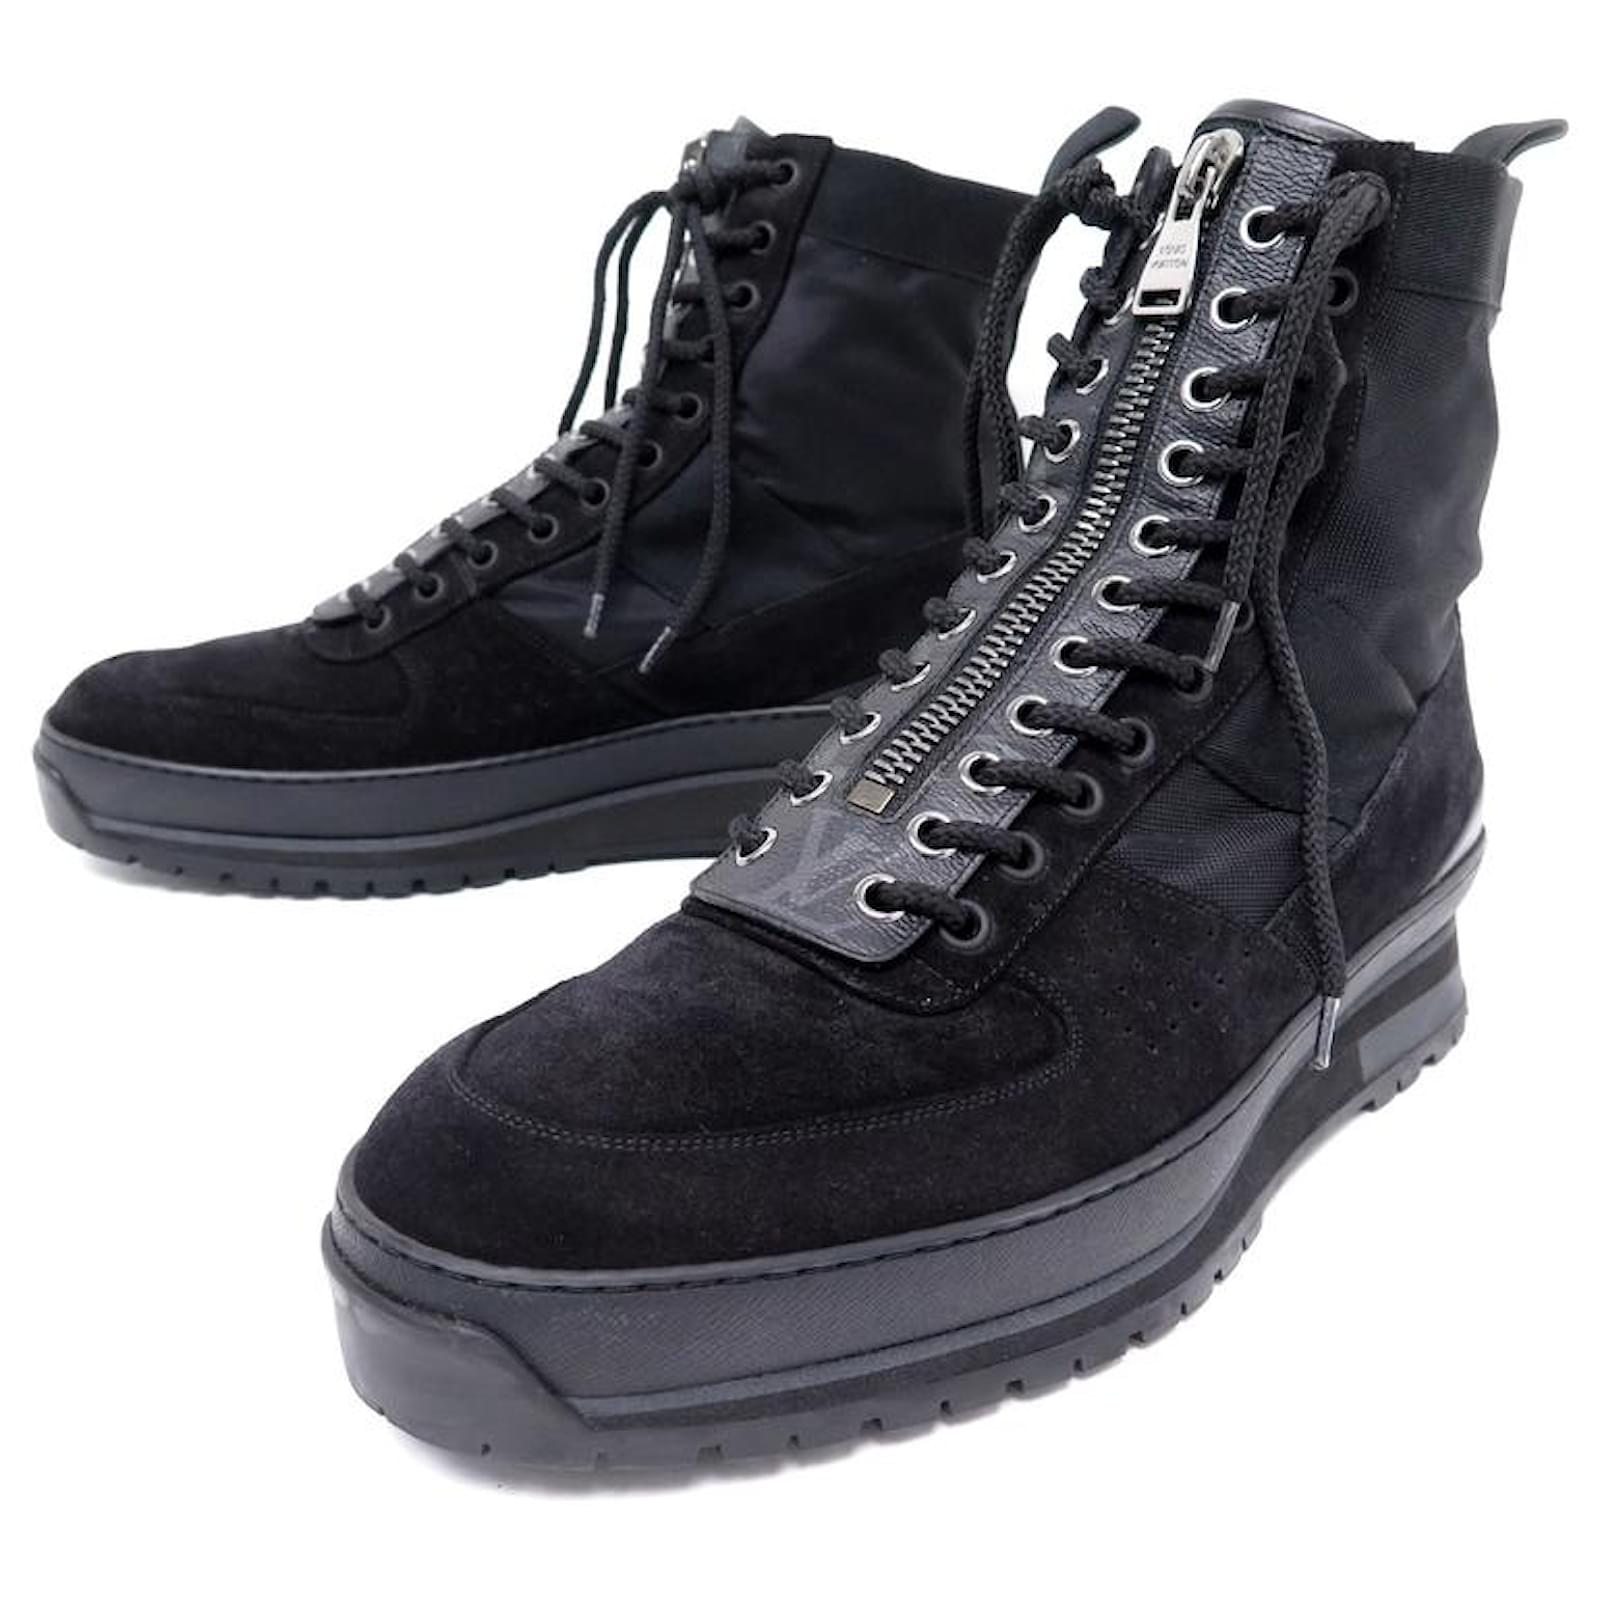 louis vuitton boots black and white